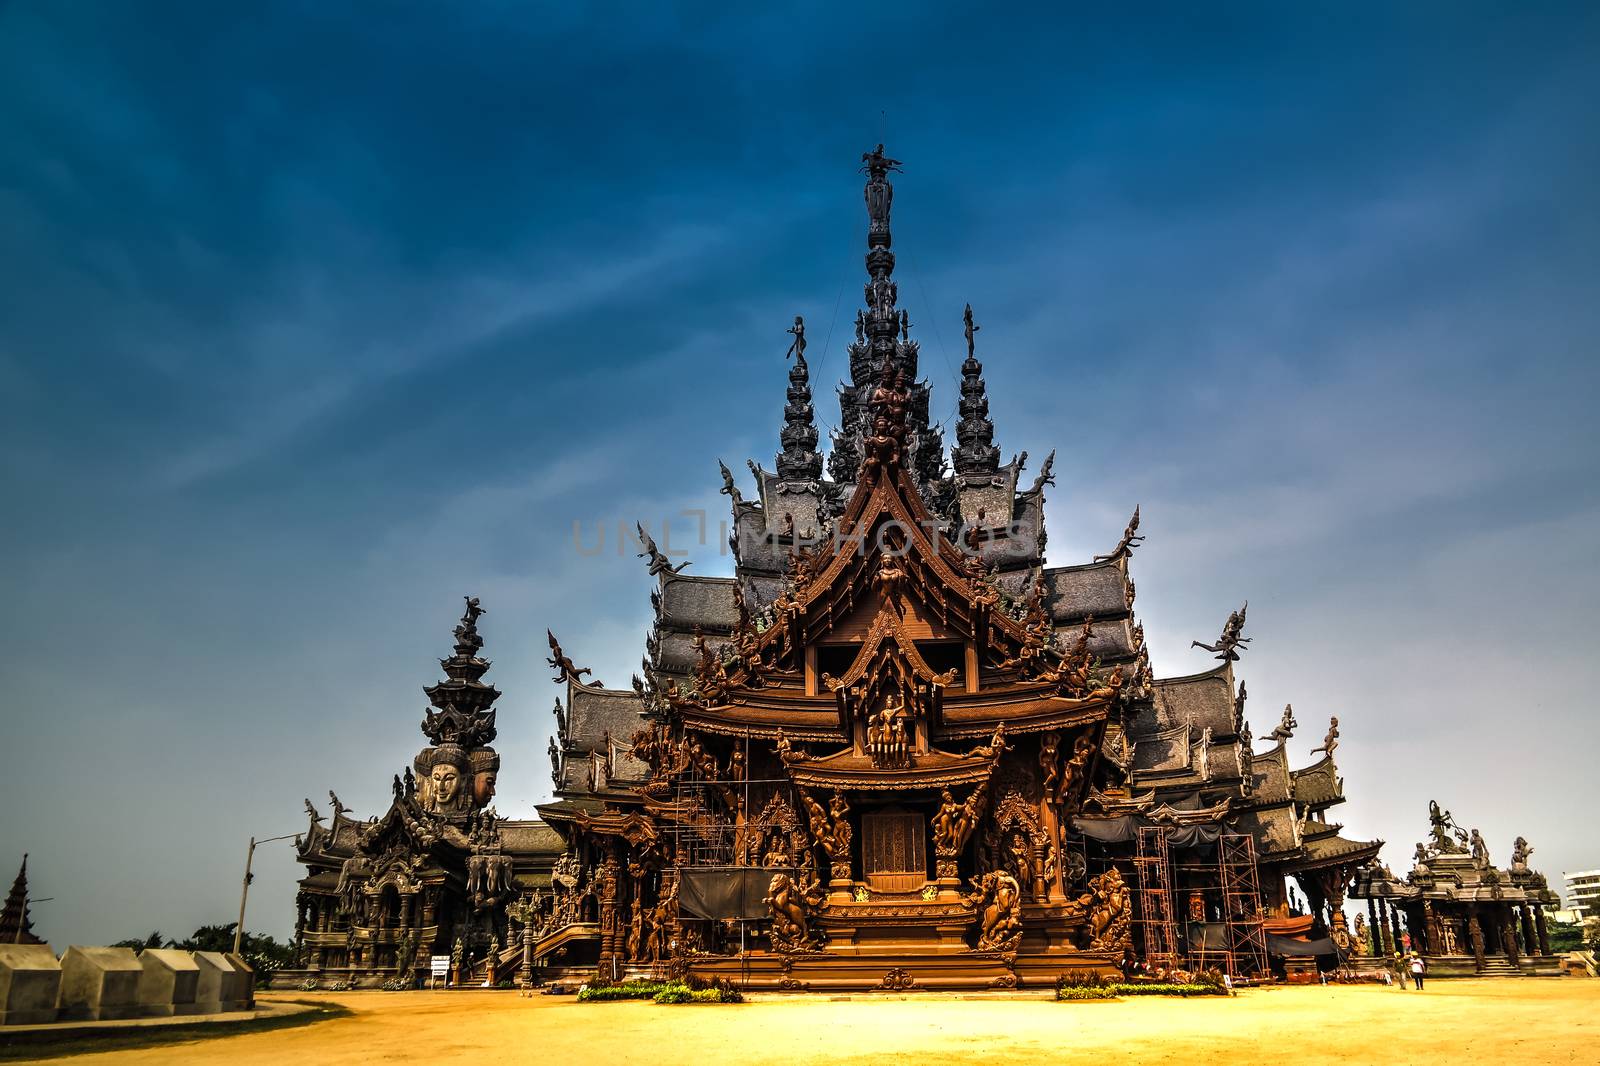 Exterior view of Sanctuary of Truth in Pattaya, Thailand